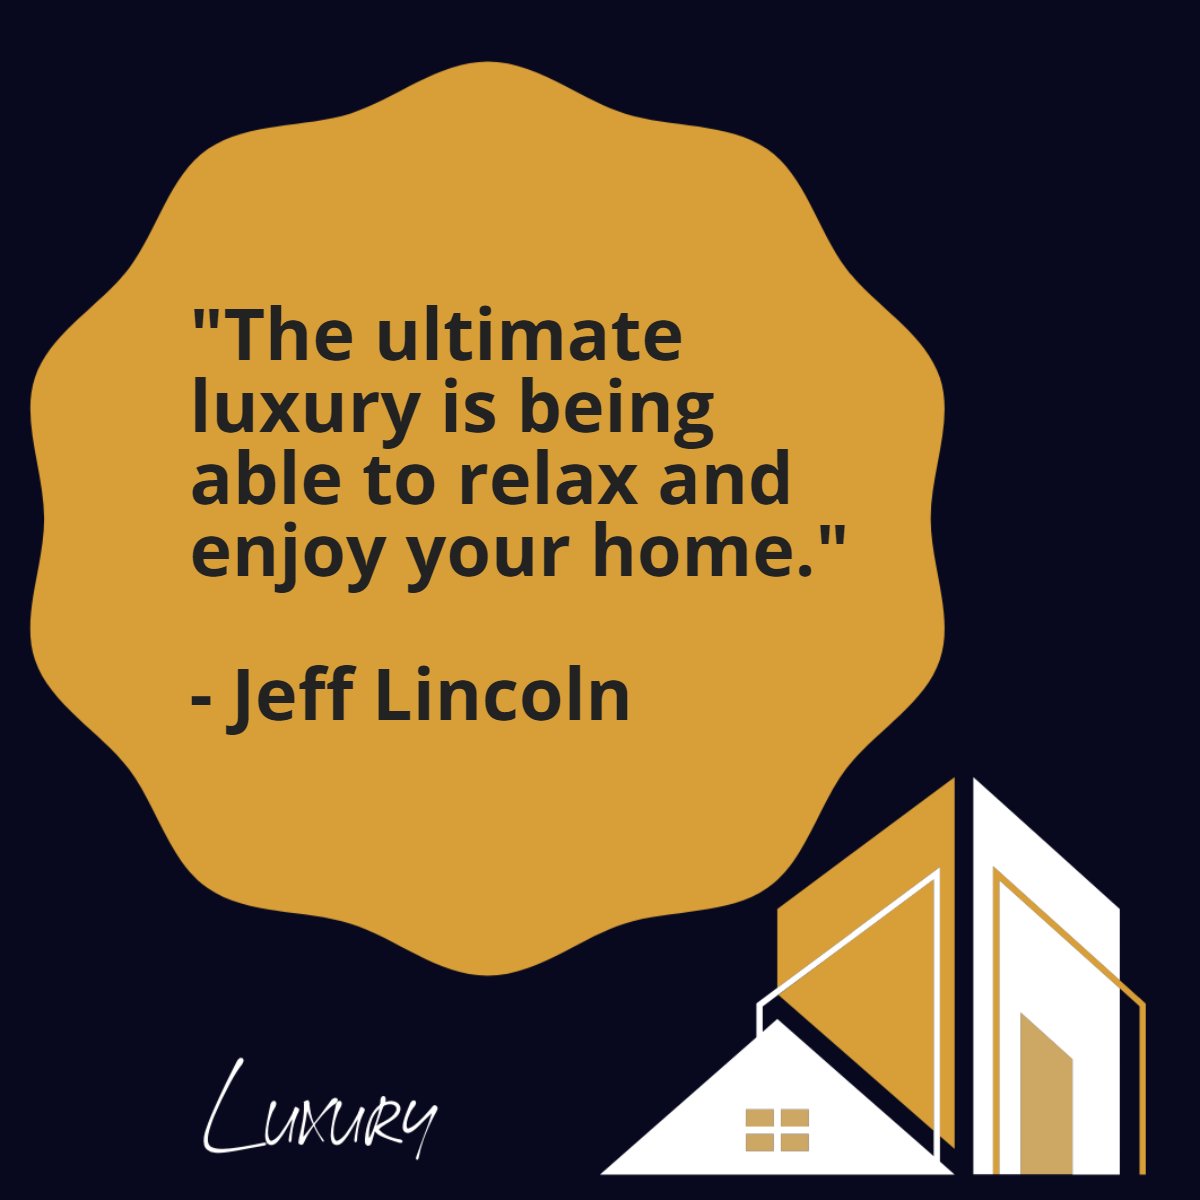 'The ultimate luxury is being able to relax and enjoy your home'
― Jeff Lincoln 📖

#luxurylifestyle    #luxury    #lovemyhome    #home    #lifestyle    #jefflincoln    #quote    #quoteoftheday✏️ 
#Realestate #Brokerlife #Marketupdate #thevisiongroup